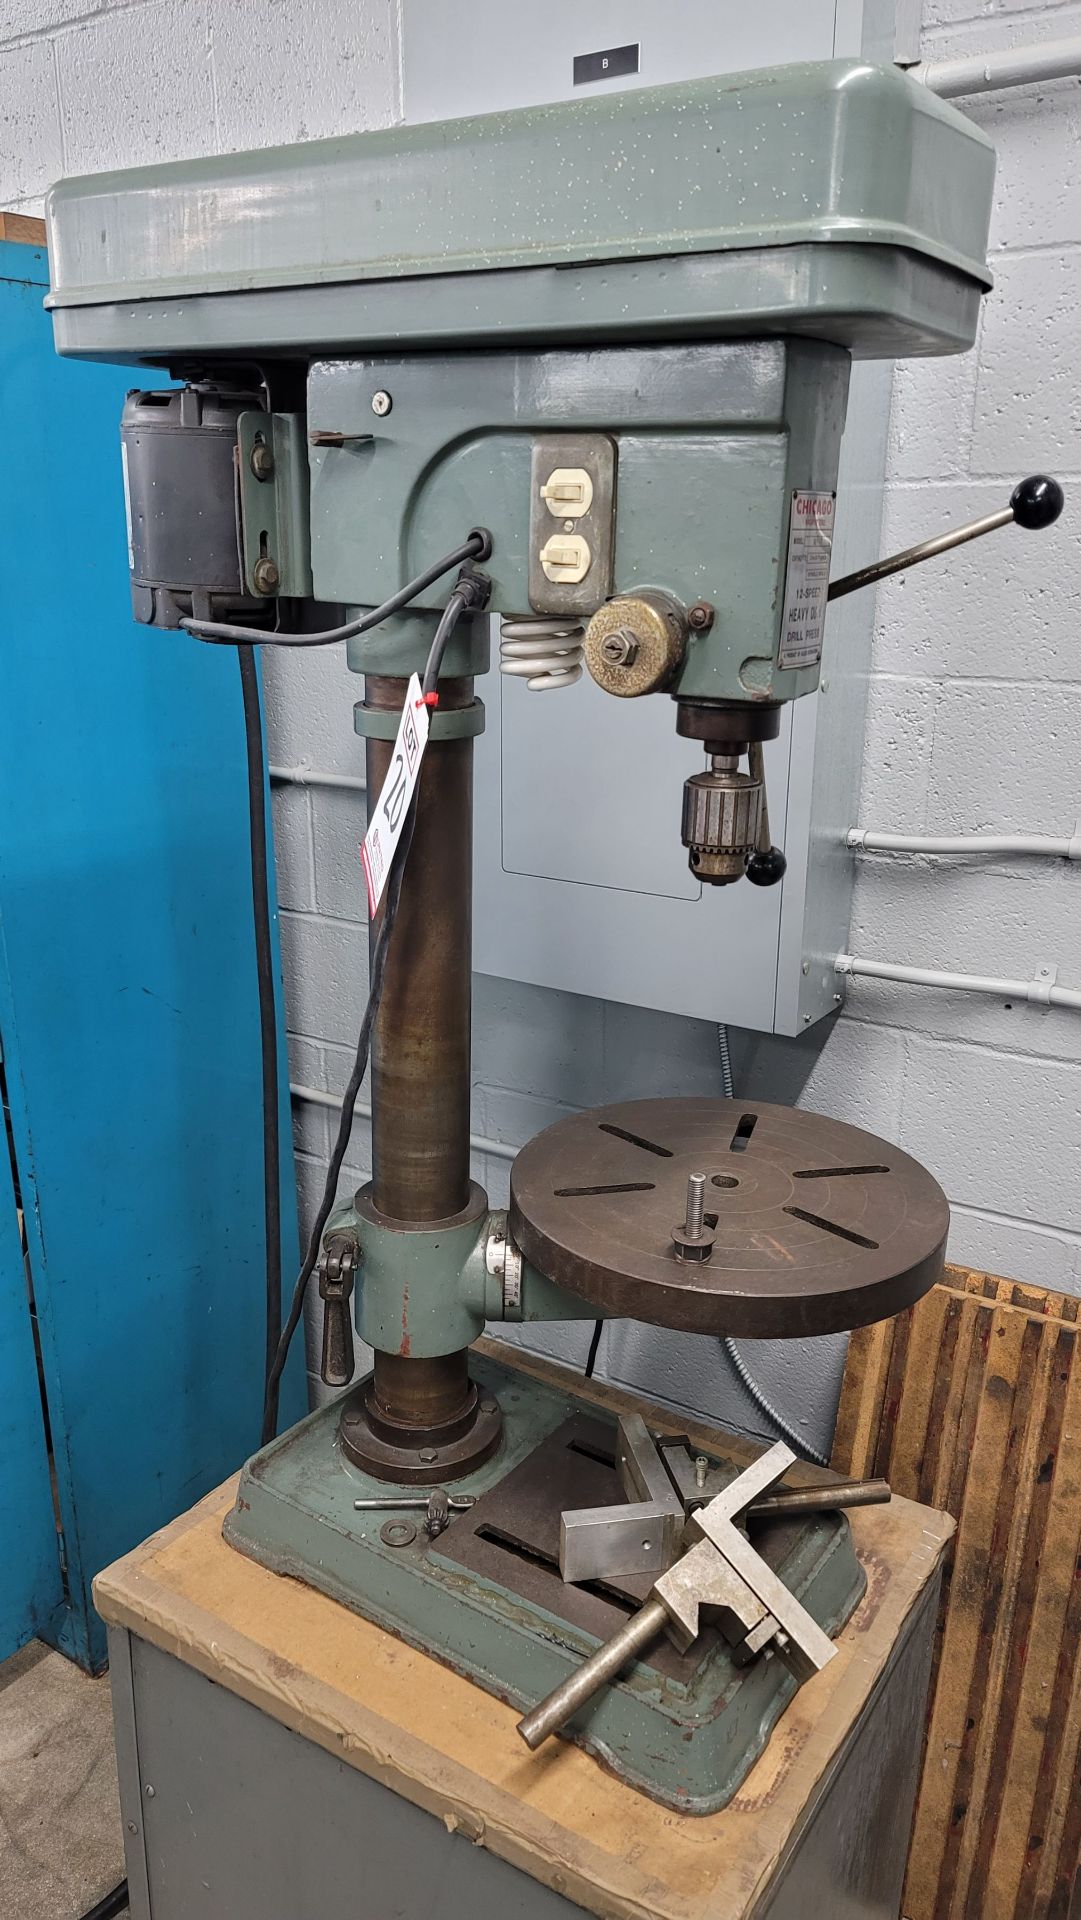 CHICAGO MACHINE TOOLS 17" BENCHTOP DRILL PRESS, 12-SPEED, 3/4 HP - Image 2 of 3